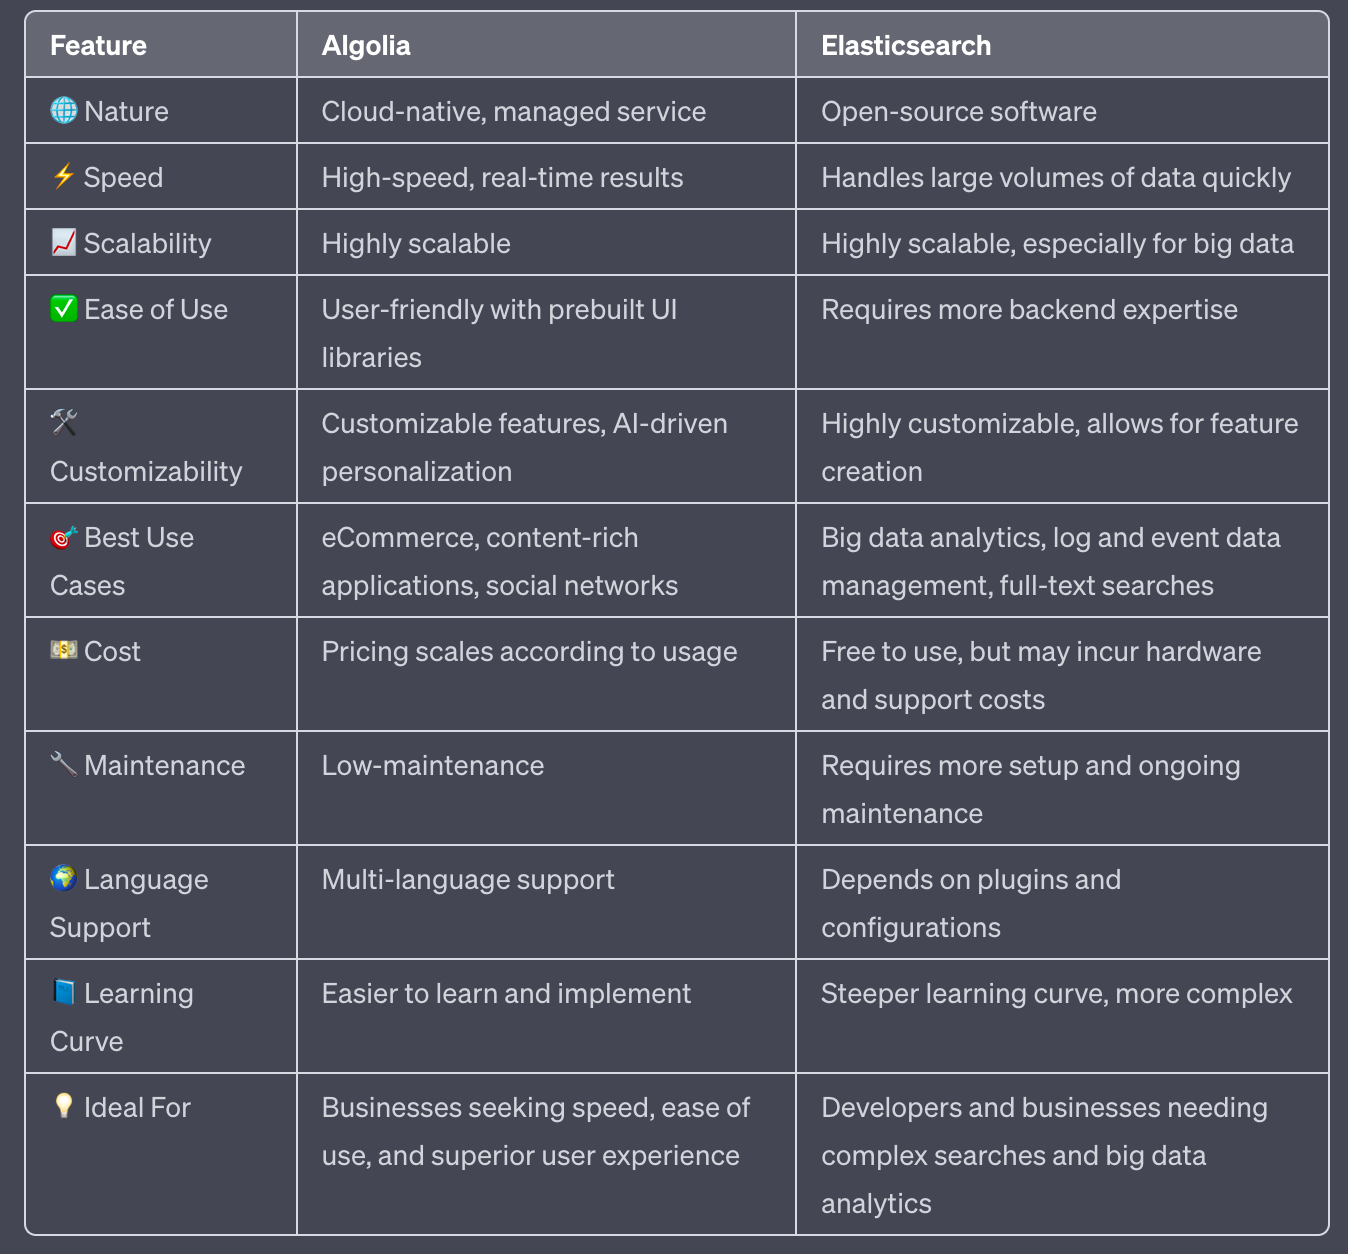 Table comparing features for Algolia and Elasticsearch